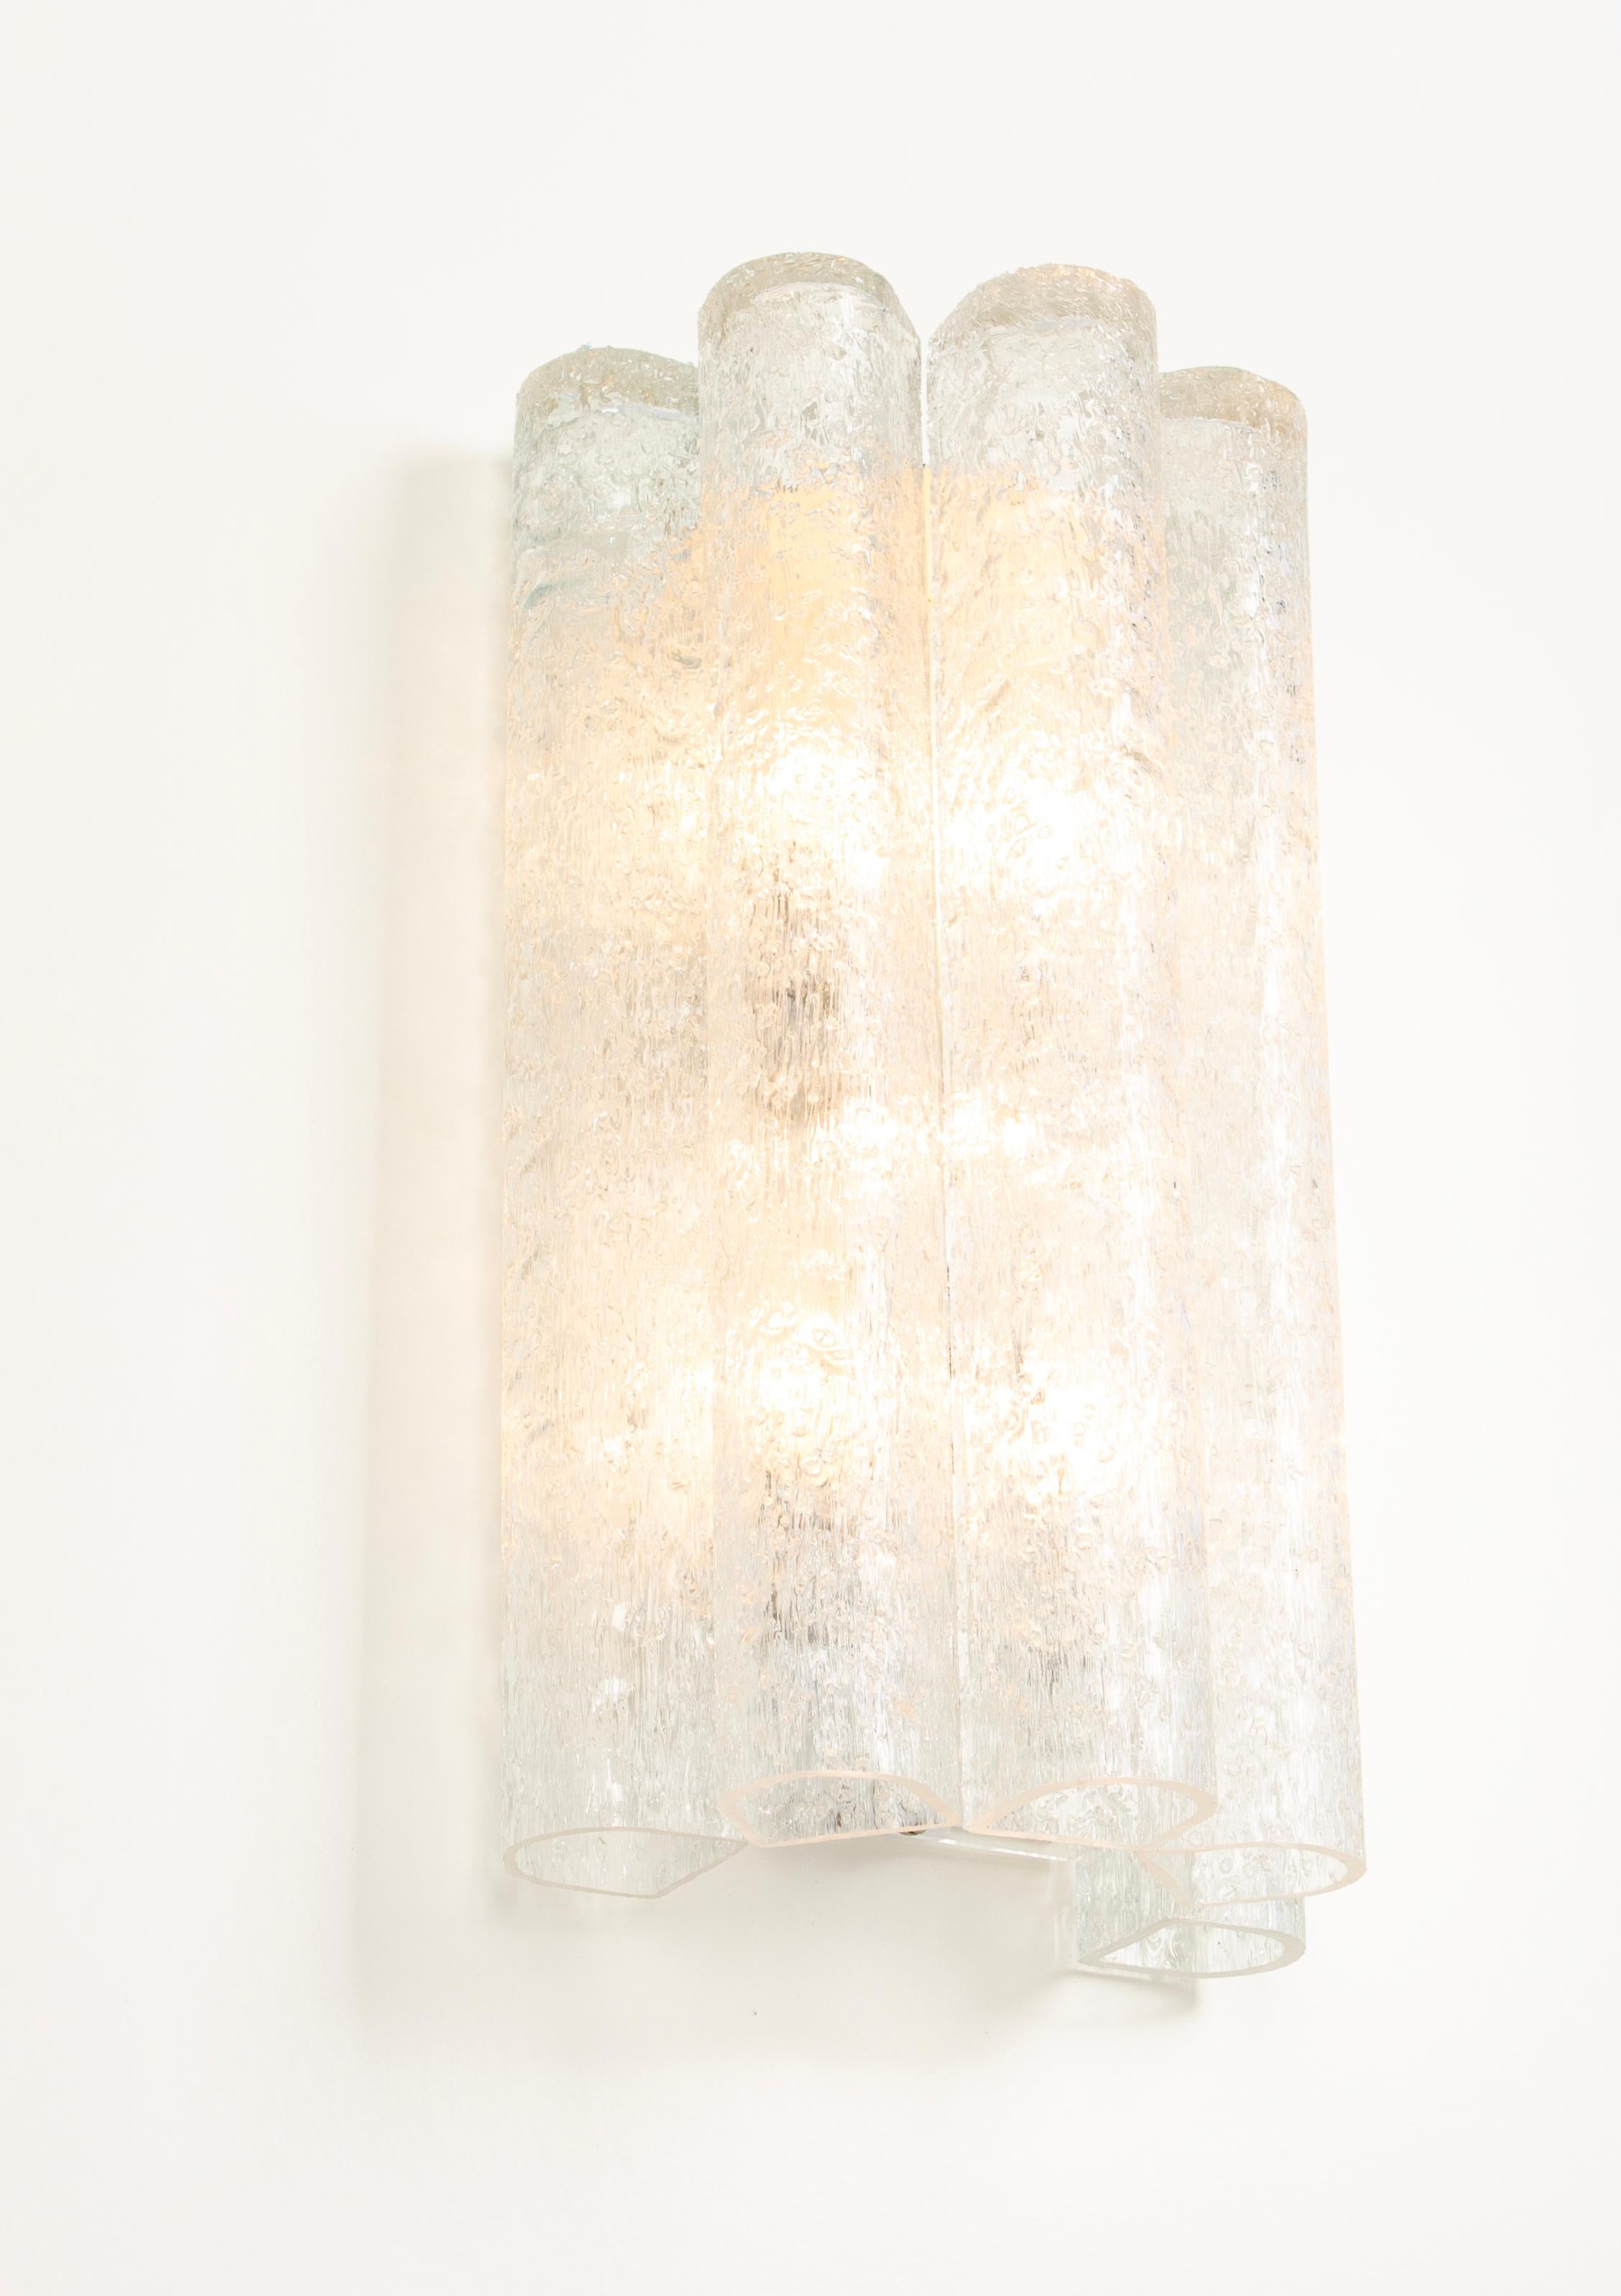 1 of 8 Sets /Large Pair of murano Glass Wall Sconces by Doria, Germany, 1960s For Sale 3